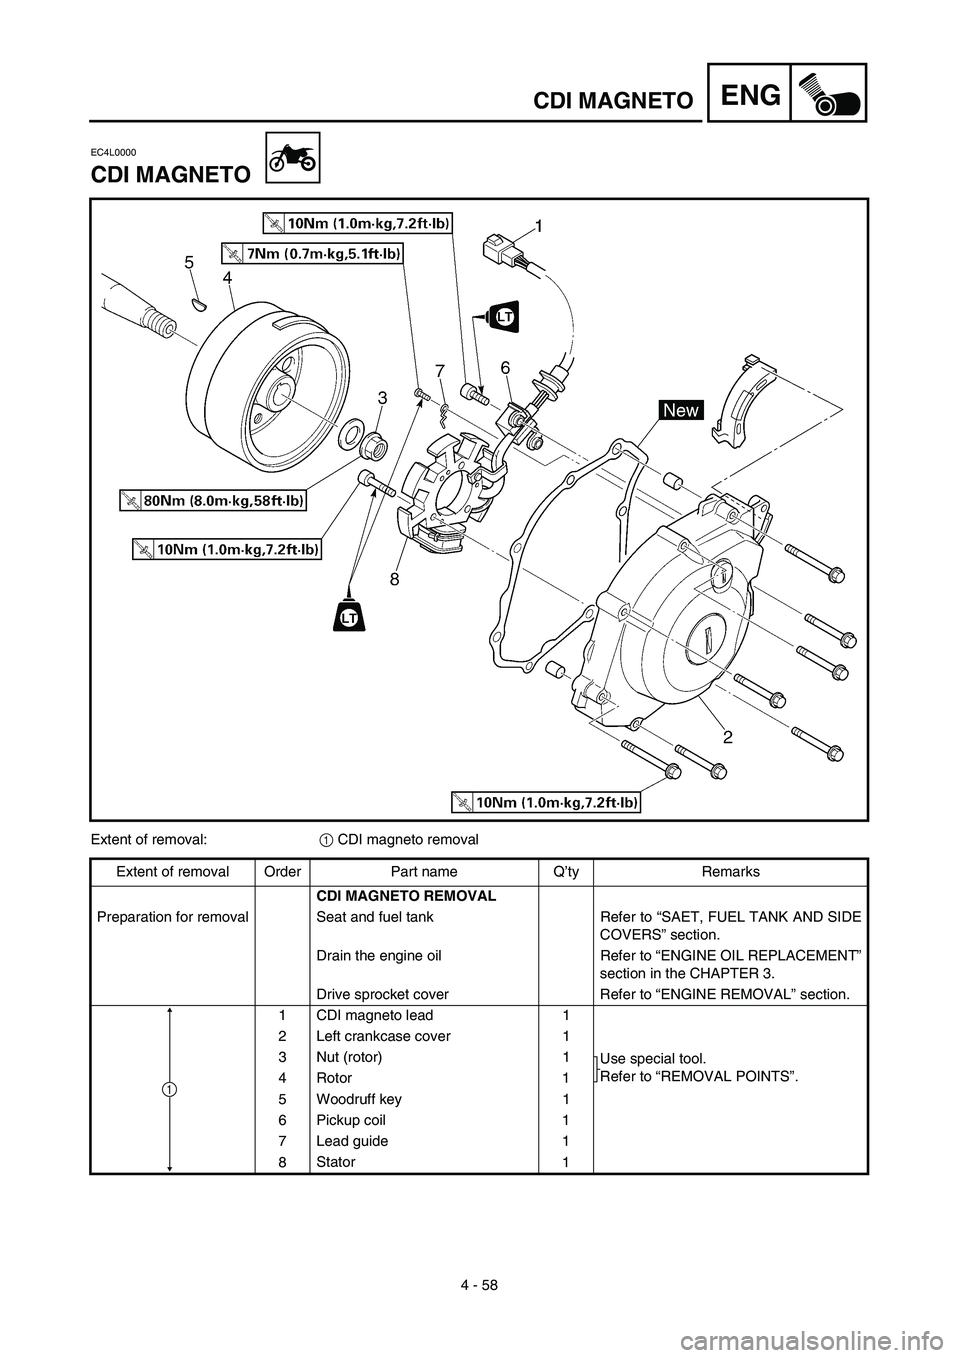 YAMAHA TTR125 2003  Notices Demploi (in French) 4 - 58
ENGCDI MAGNETO
EC4L0000
CDI MAGNETO
Extent of removal:1 CDI magneto removal
Extent of removal Order Part name Q’ty Remarks
CDI MAGNETO REMOVAL 
Preparation for removal Seat and fuel tank Refe